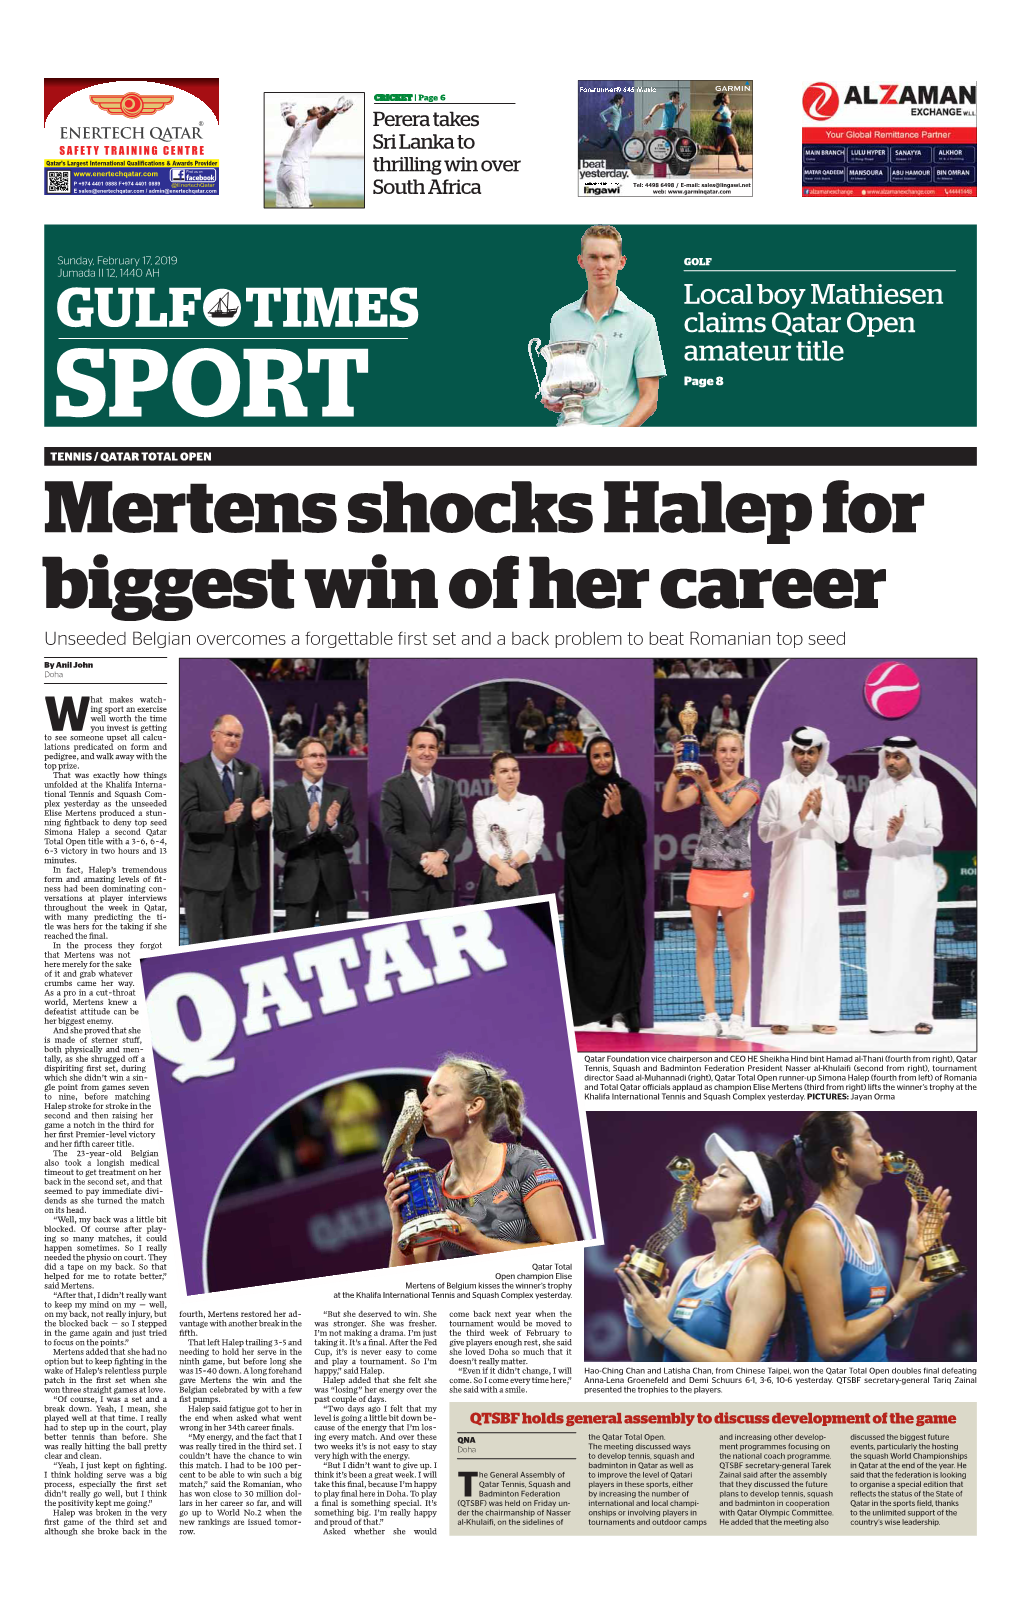 Mertens Shocks Halep for Biggest Win of Her Career Unseeded Belgian Overcomes a Forgettable First Set and a Back Problem to Beat Romanian Top Seed